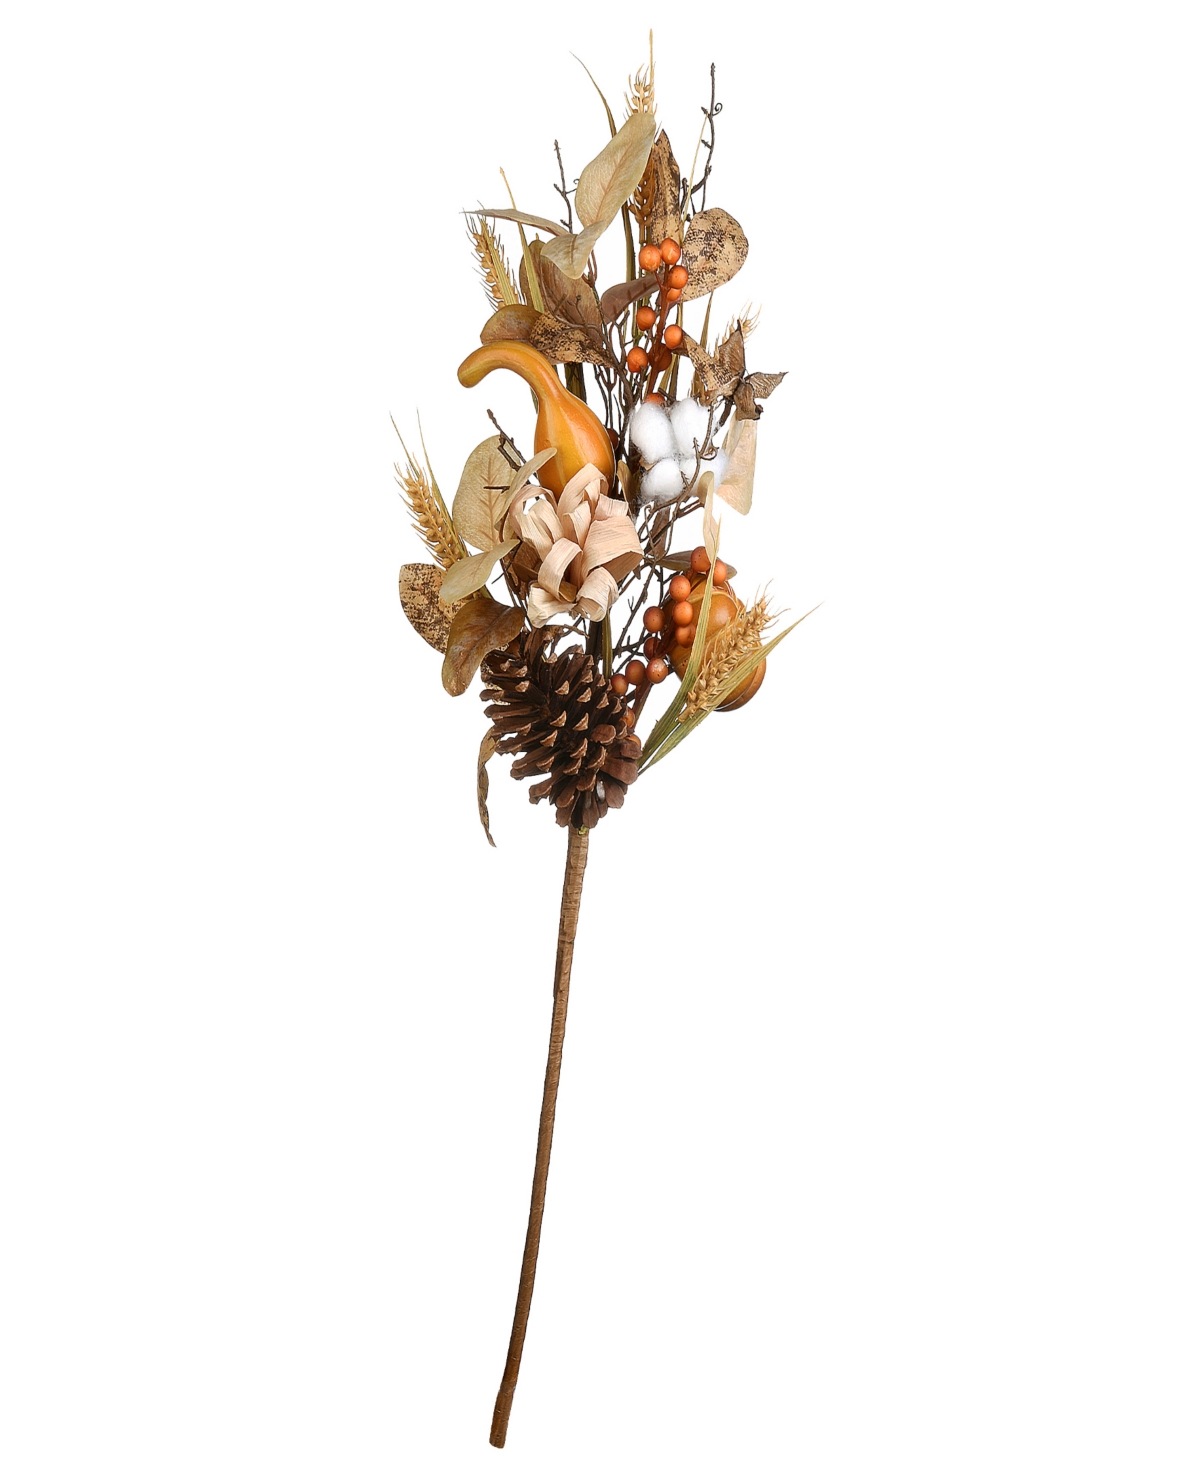 28" Artificial Autumn Bouquet, Set of Two, Decorated with Gourds, Berry Clusters, Pine Cones, Assorted Leaves, Autumn Collection